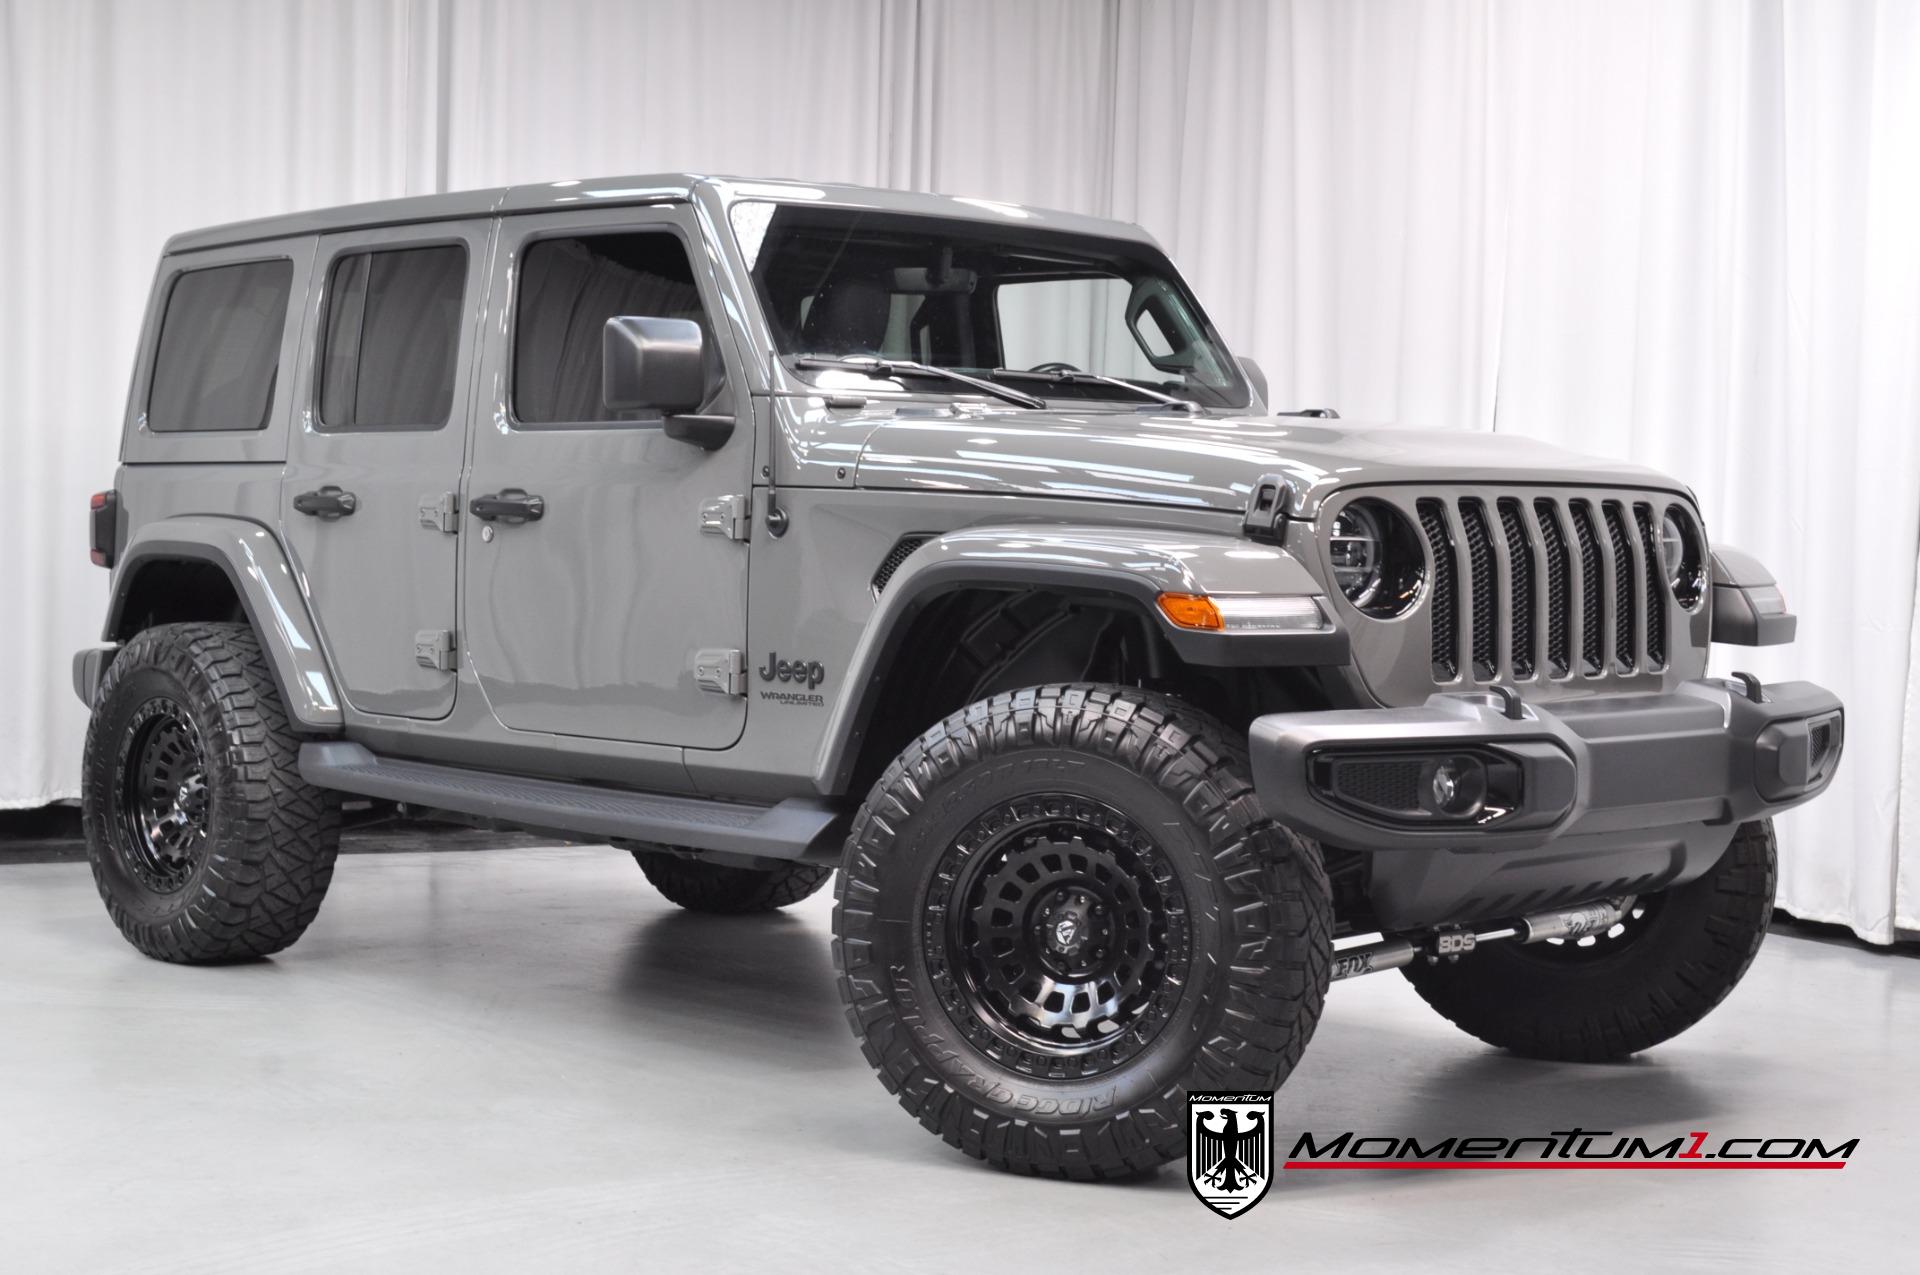 Used 2020 Jeep Wrangler Unlimited Sahara Altitude For Sale (Sold) |  Momentum Motorcars Inc Stock #137769